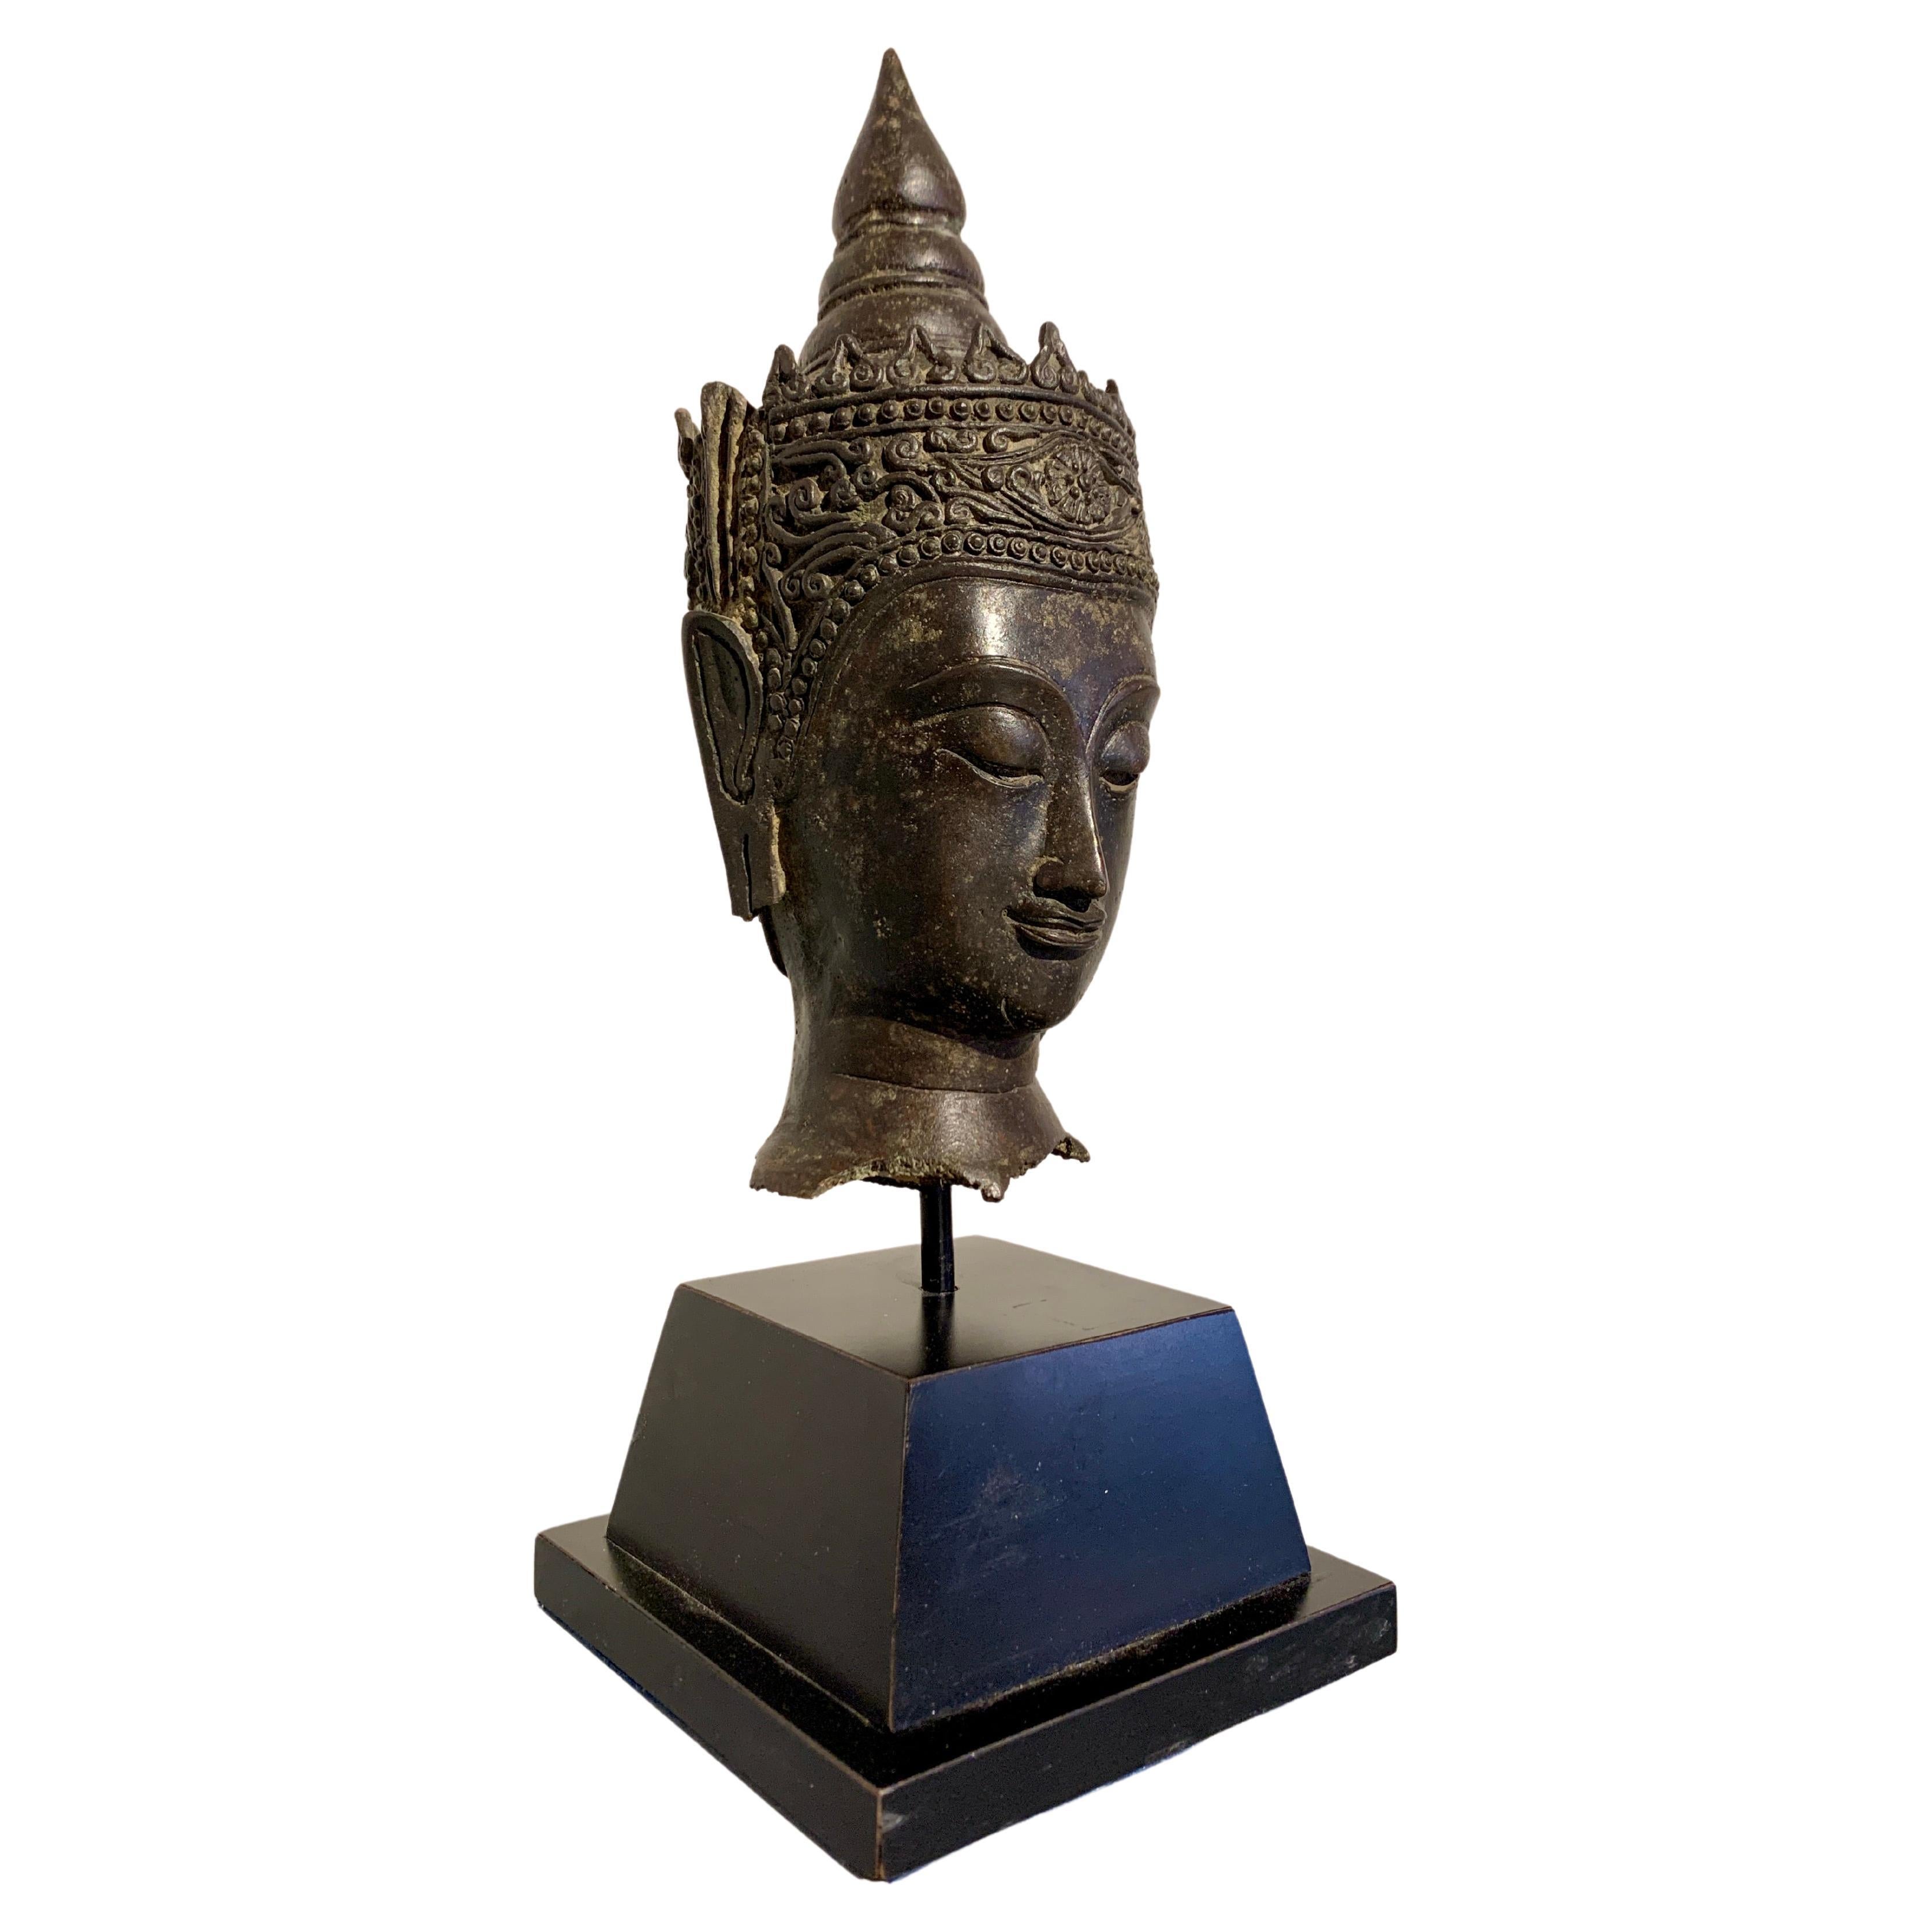 An enchanting Thai cast bronze head of a crowned Buddha, Ayutthaya period, 17th century, Thailand.

The Buddha's face is simply gorgeous, with elegant, well defined features. The Buddha looks out from downcast eyes under high arched brows. The